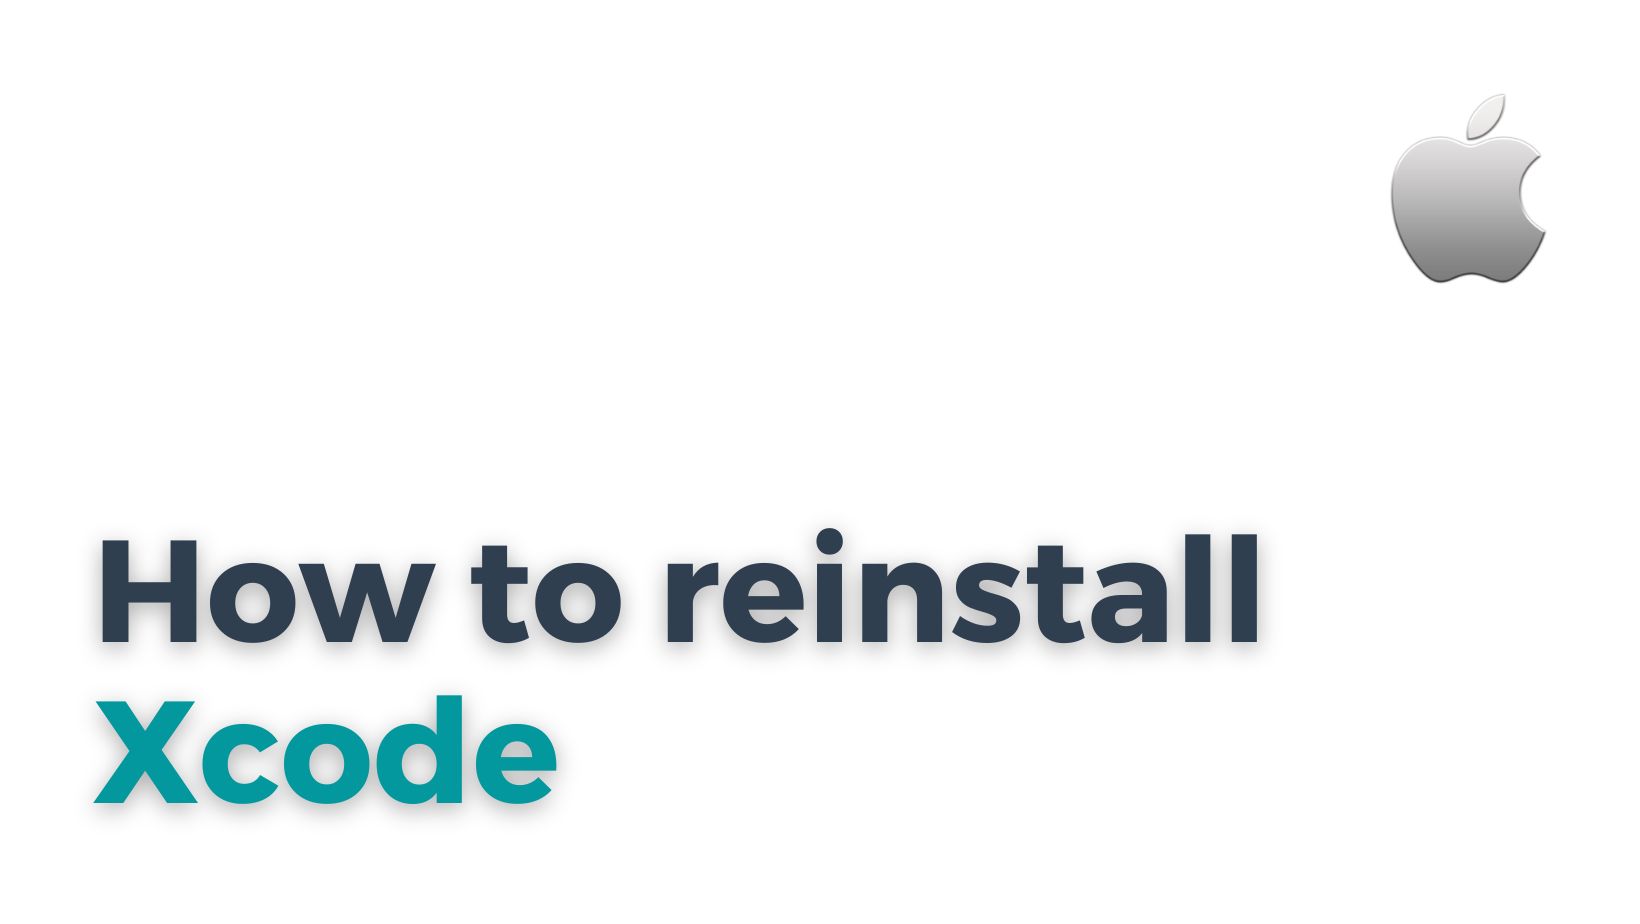 How to reinstall Xcode